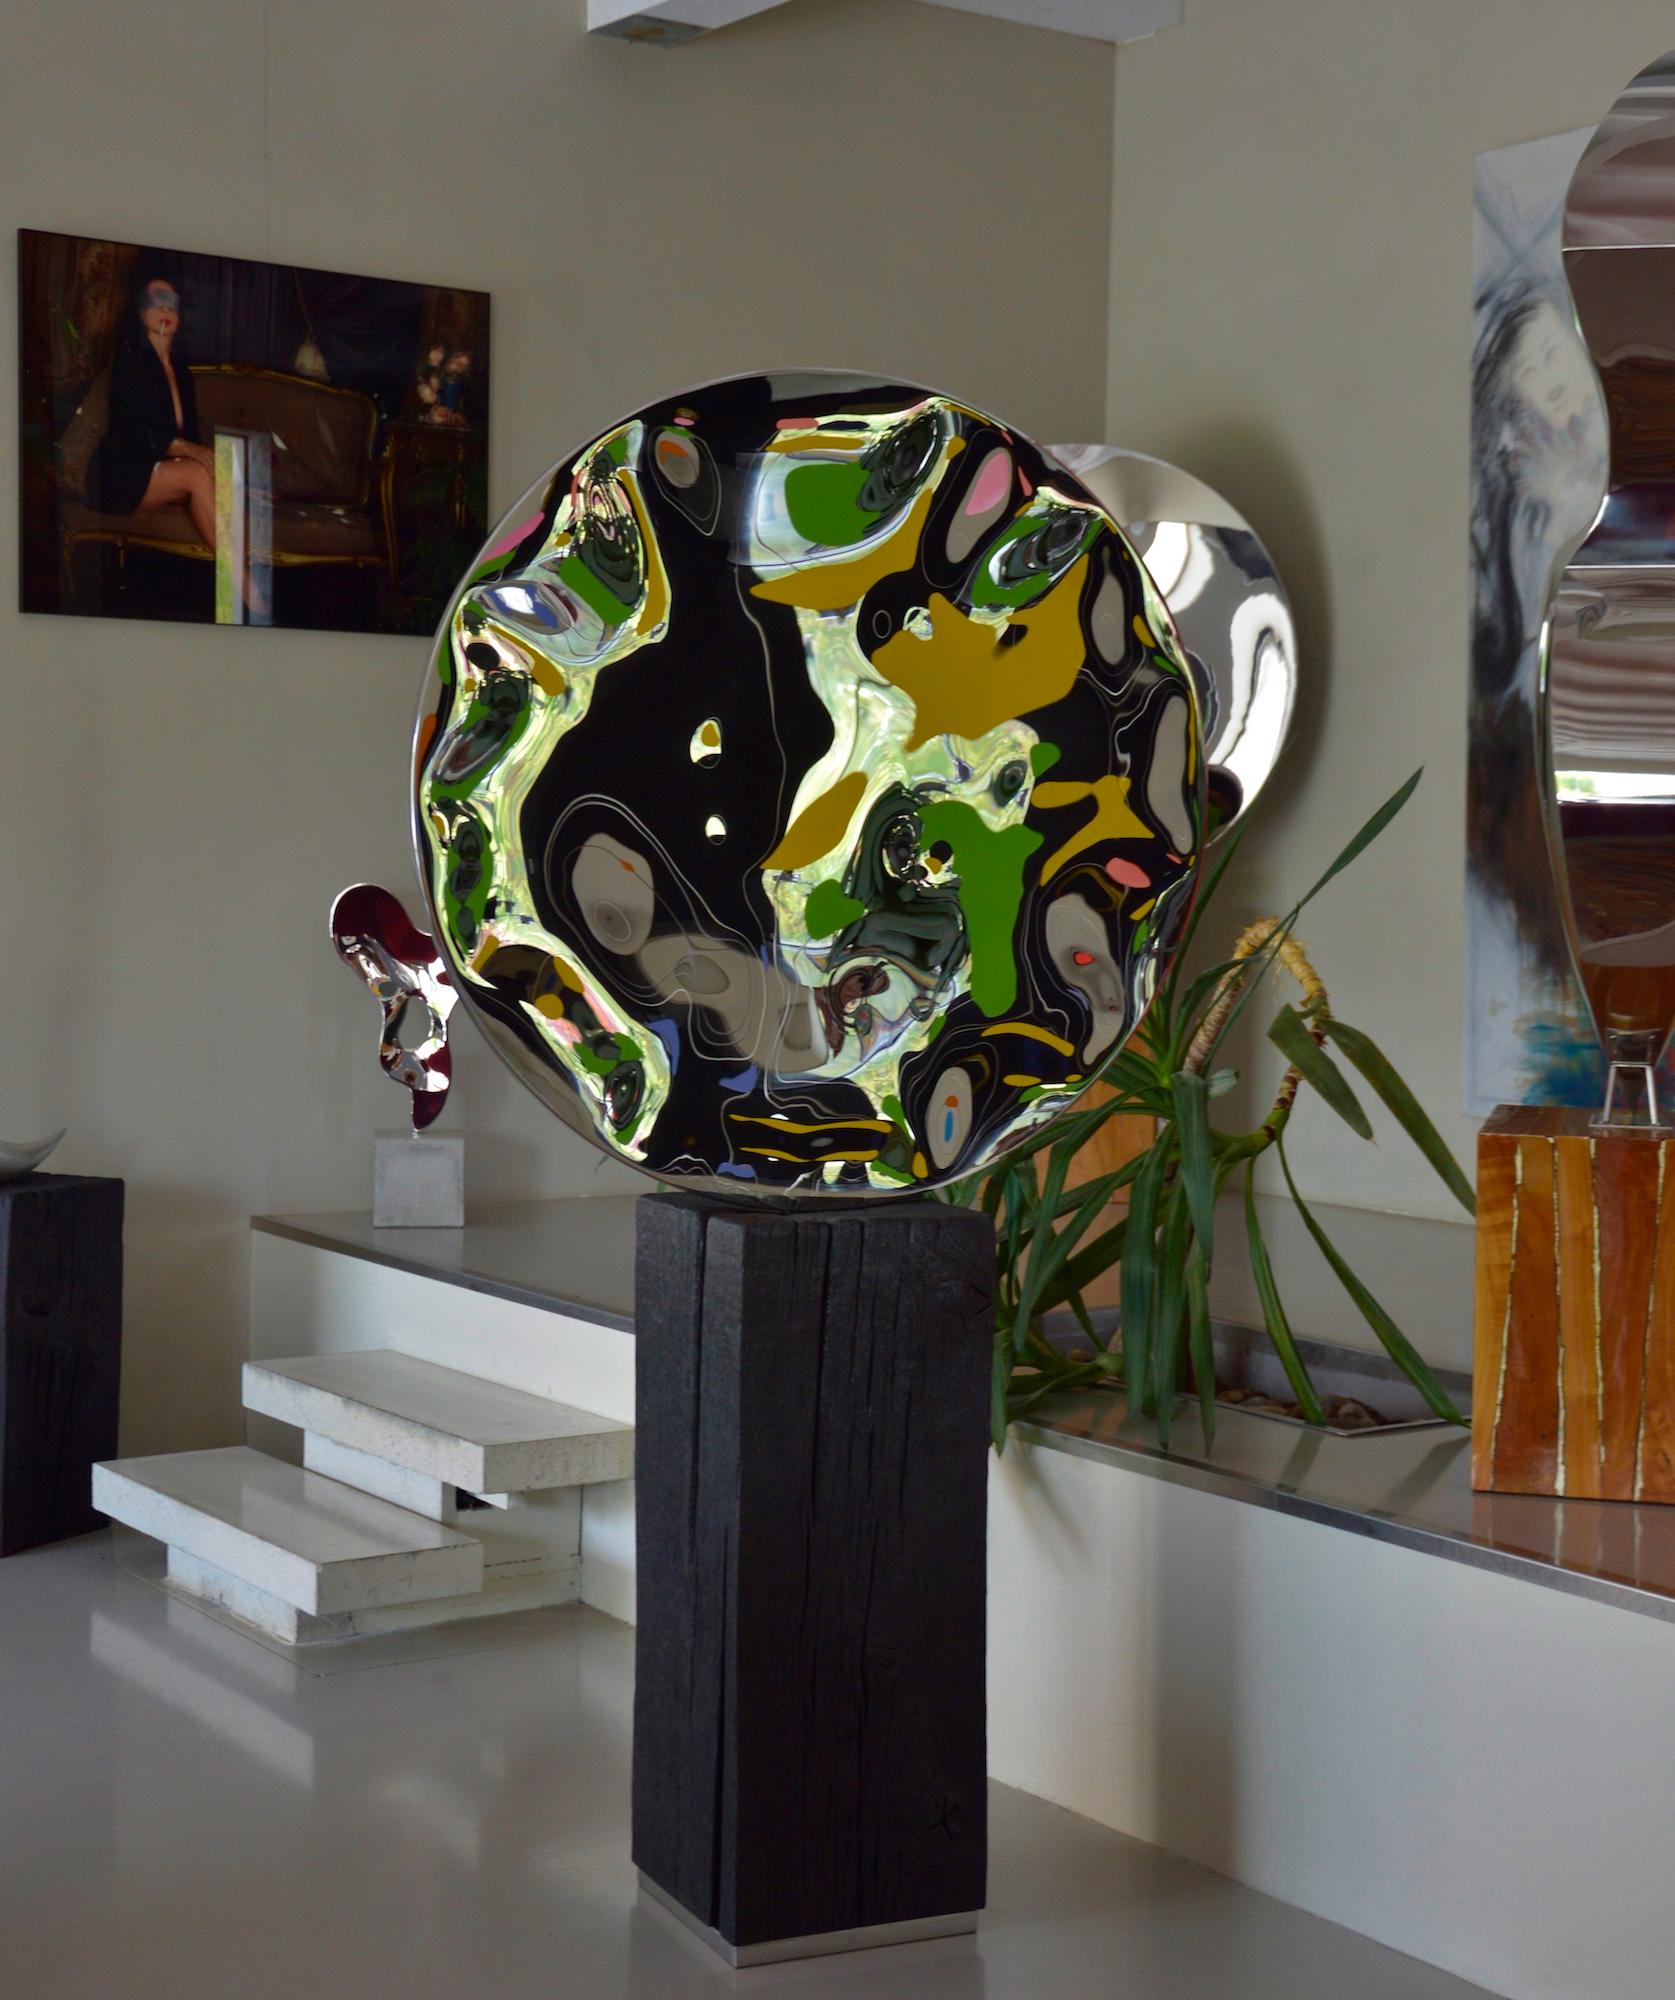 “Shattered” mirror II by Franck K - Stainless steel sculpture, reflection, light For Sale 2